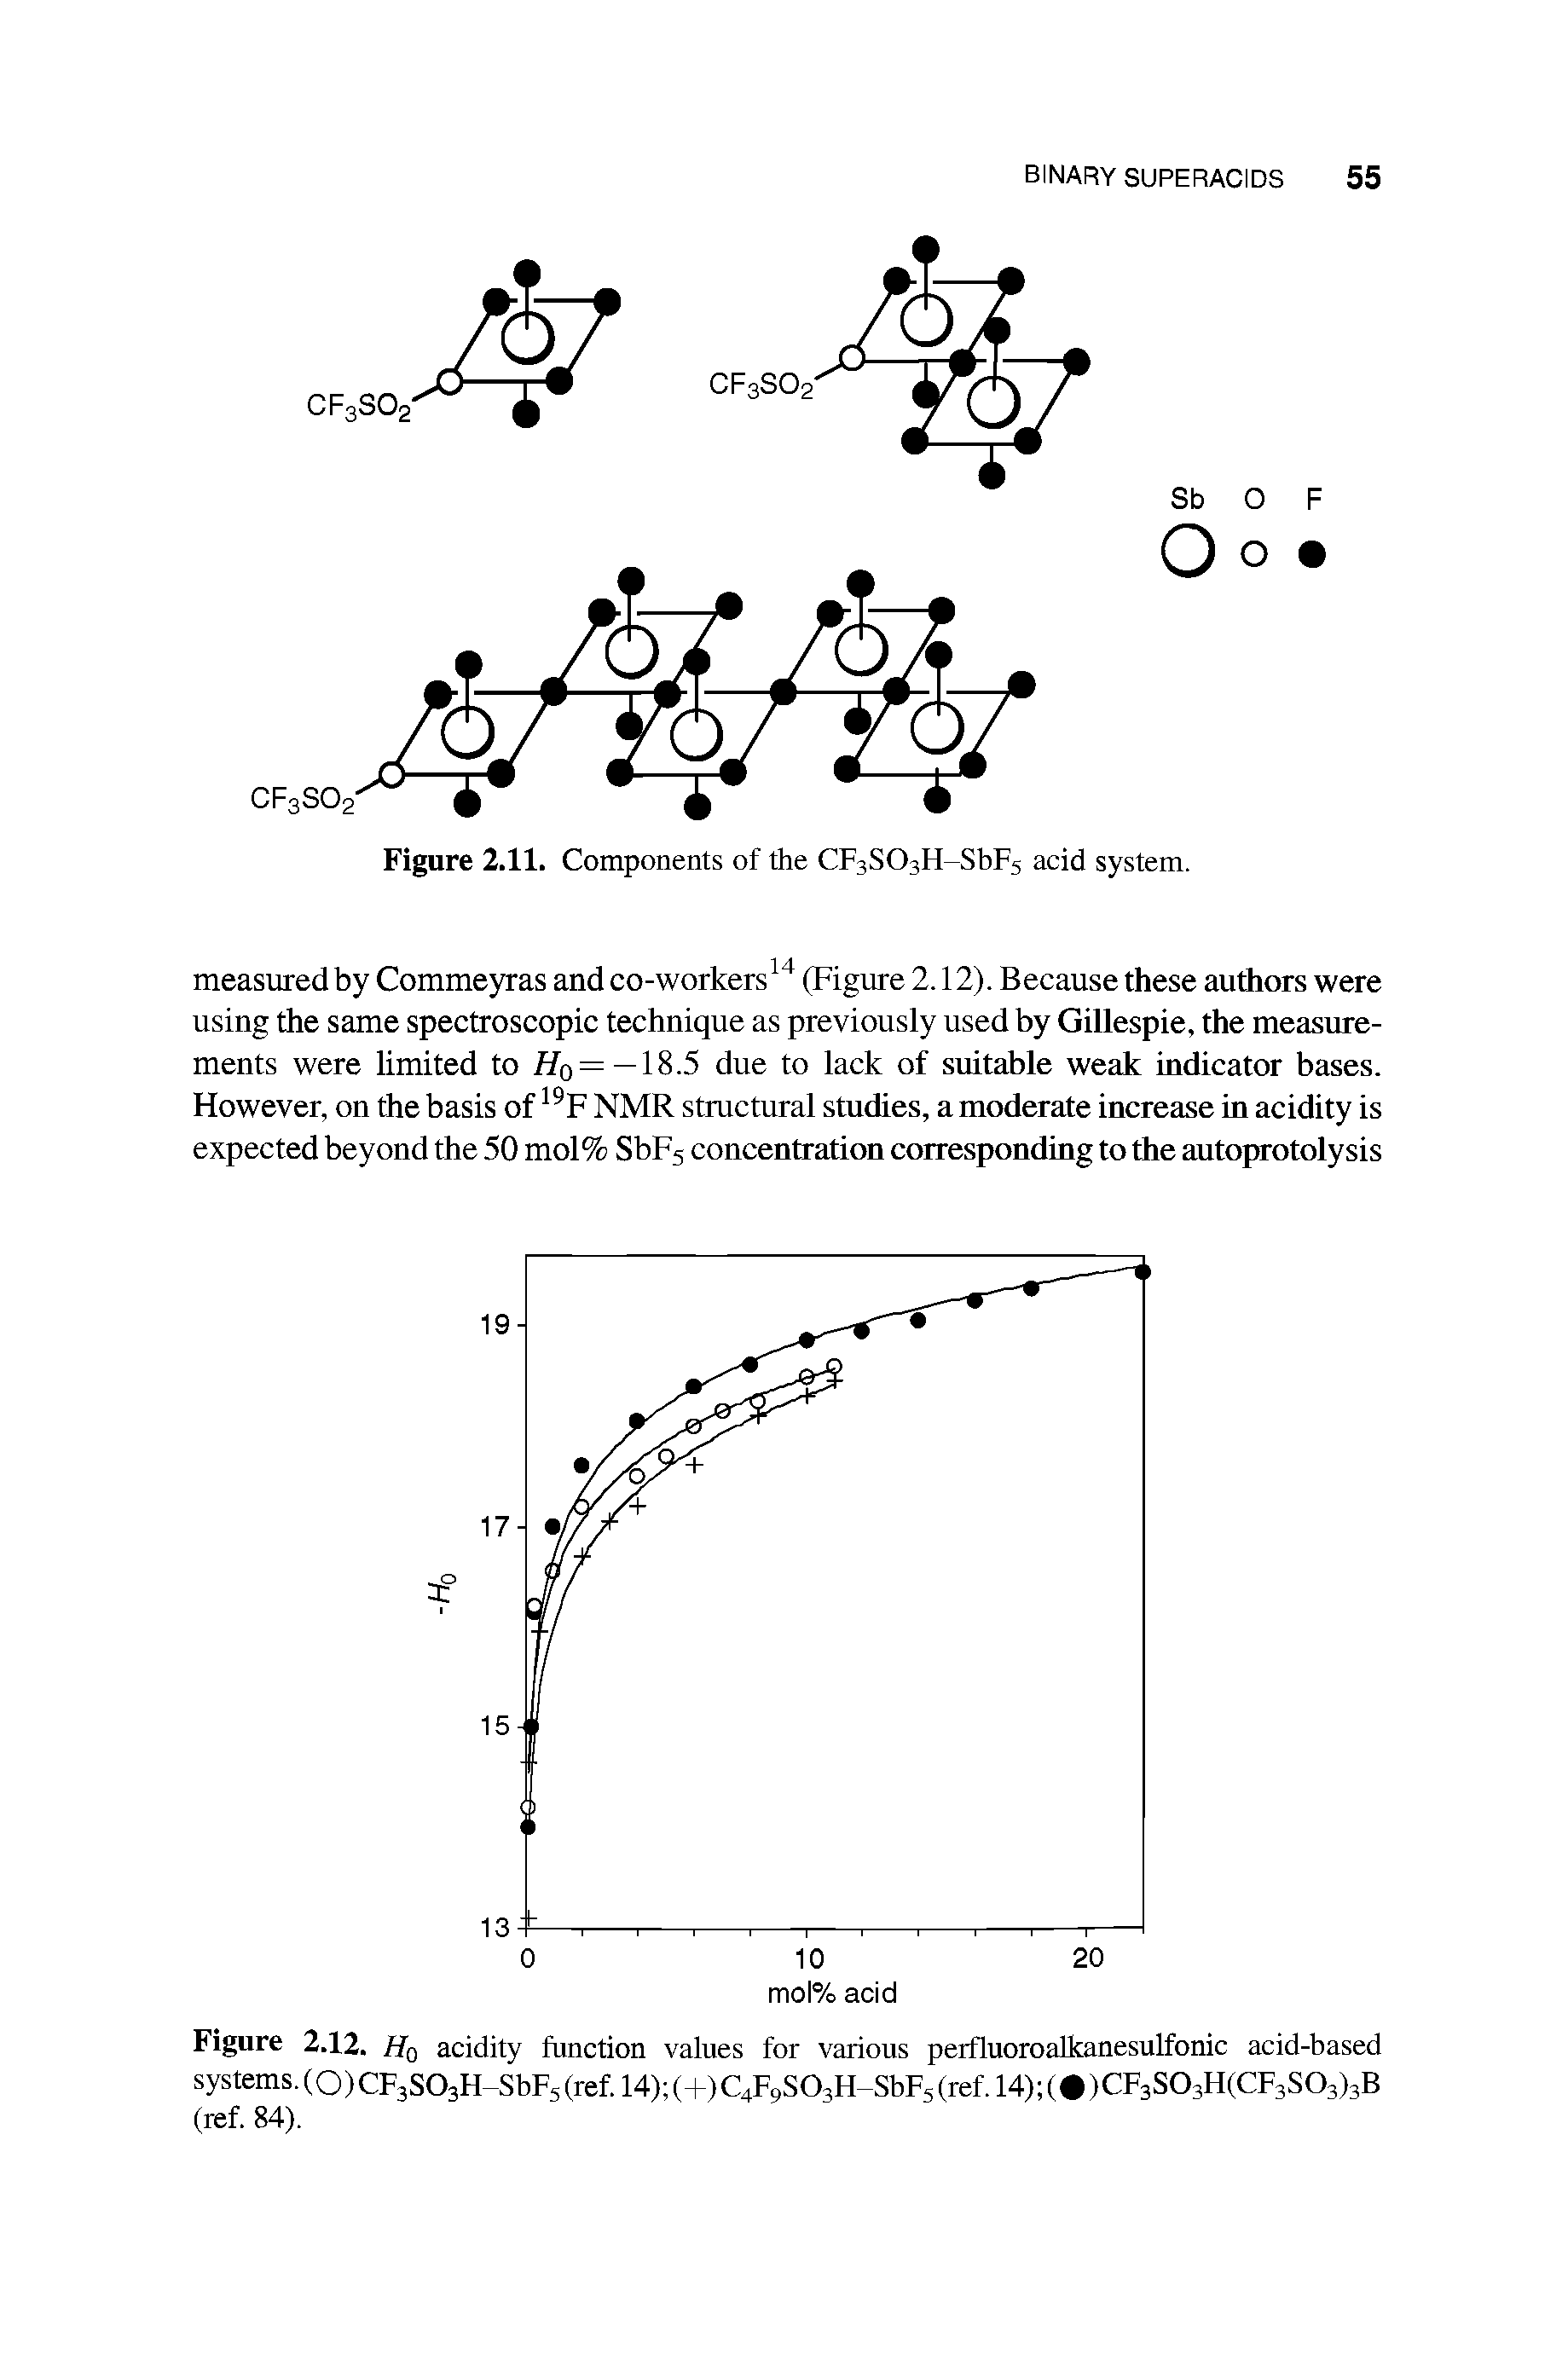 Figure 2.12. Hq acidity function values for various perfluoroalkanesulfonic acid-based systems. (0)CF3S03H-SbF5 (ref. 14) (+)C4F9S03H-SbF5 (ref. 14) ( )CF3S03H(CF3S03)3B (ref. 84).